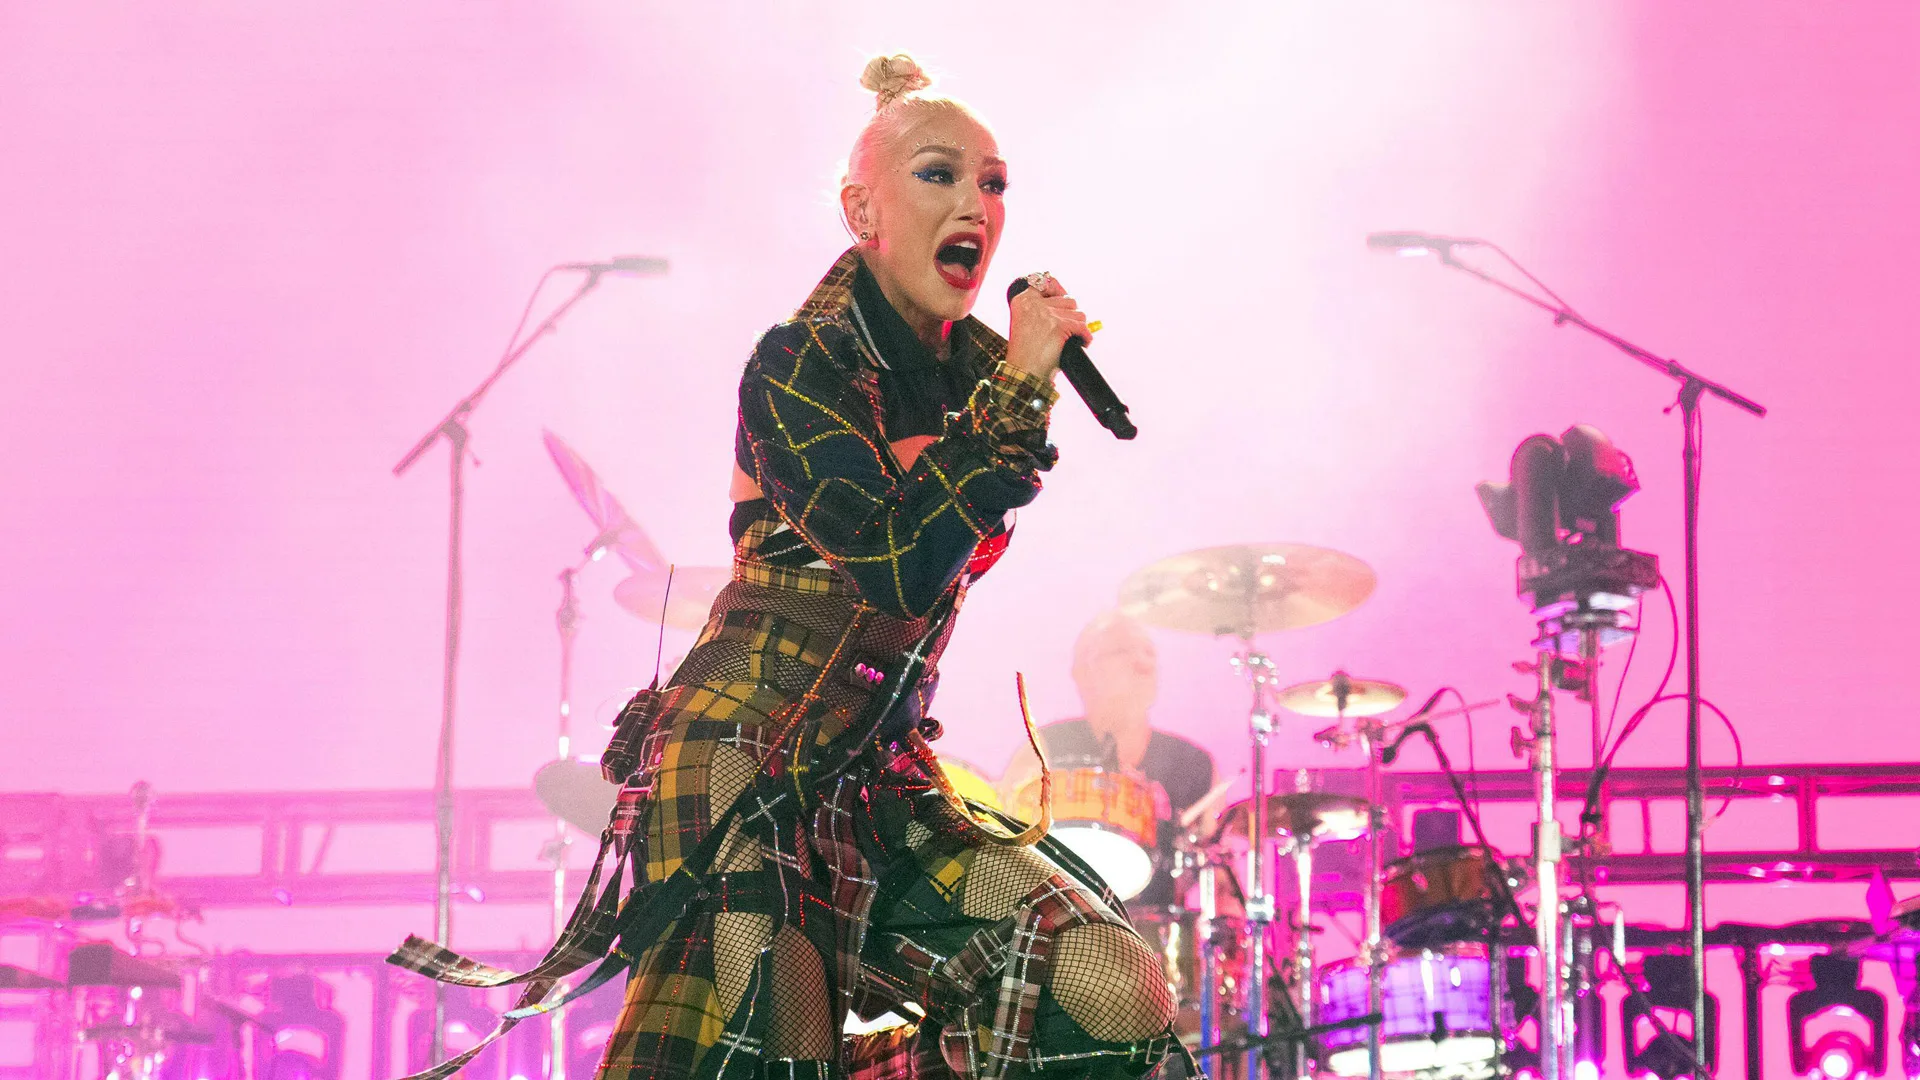 A photo of Gwen Stefani performing on stage singing into a mic against a pink lit background